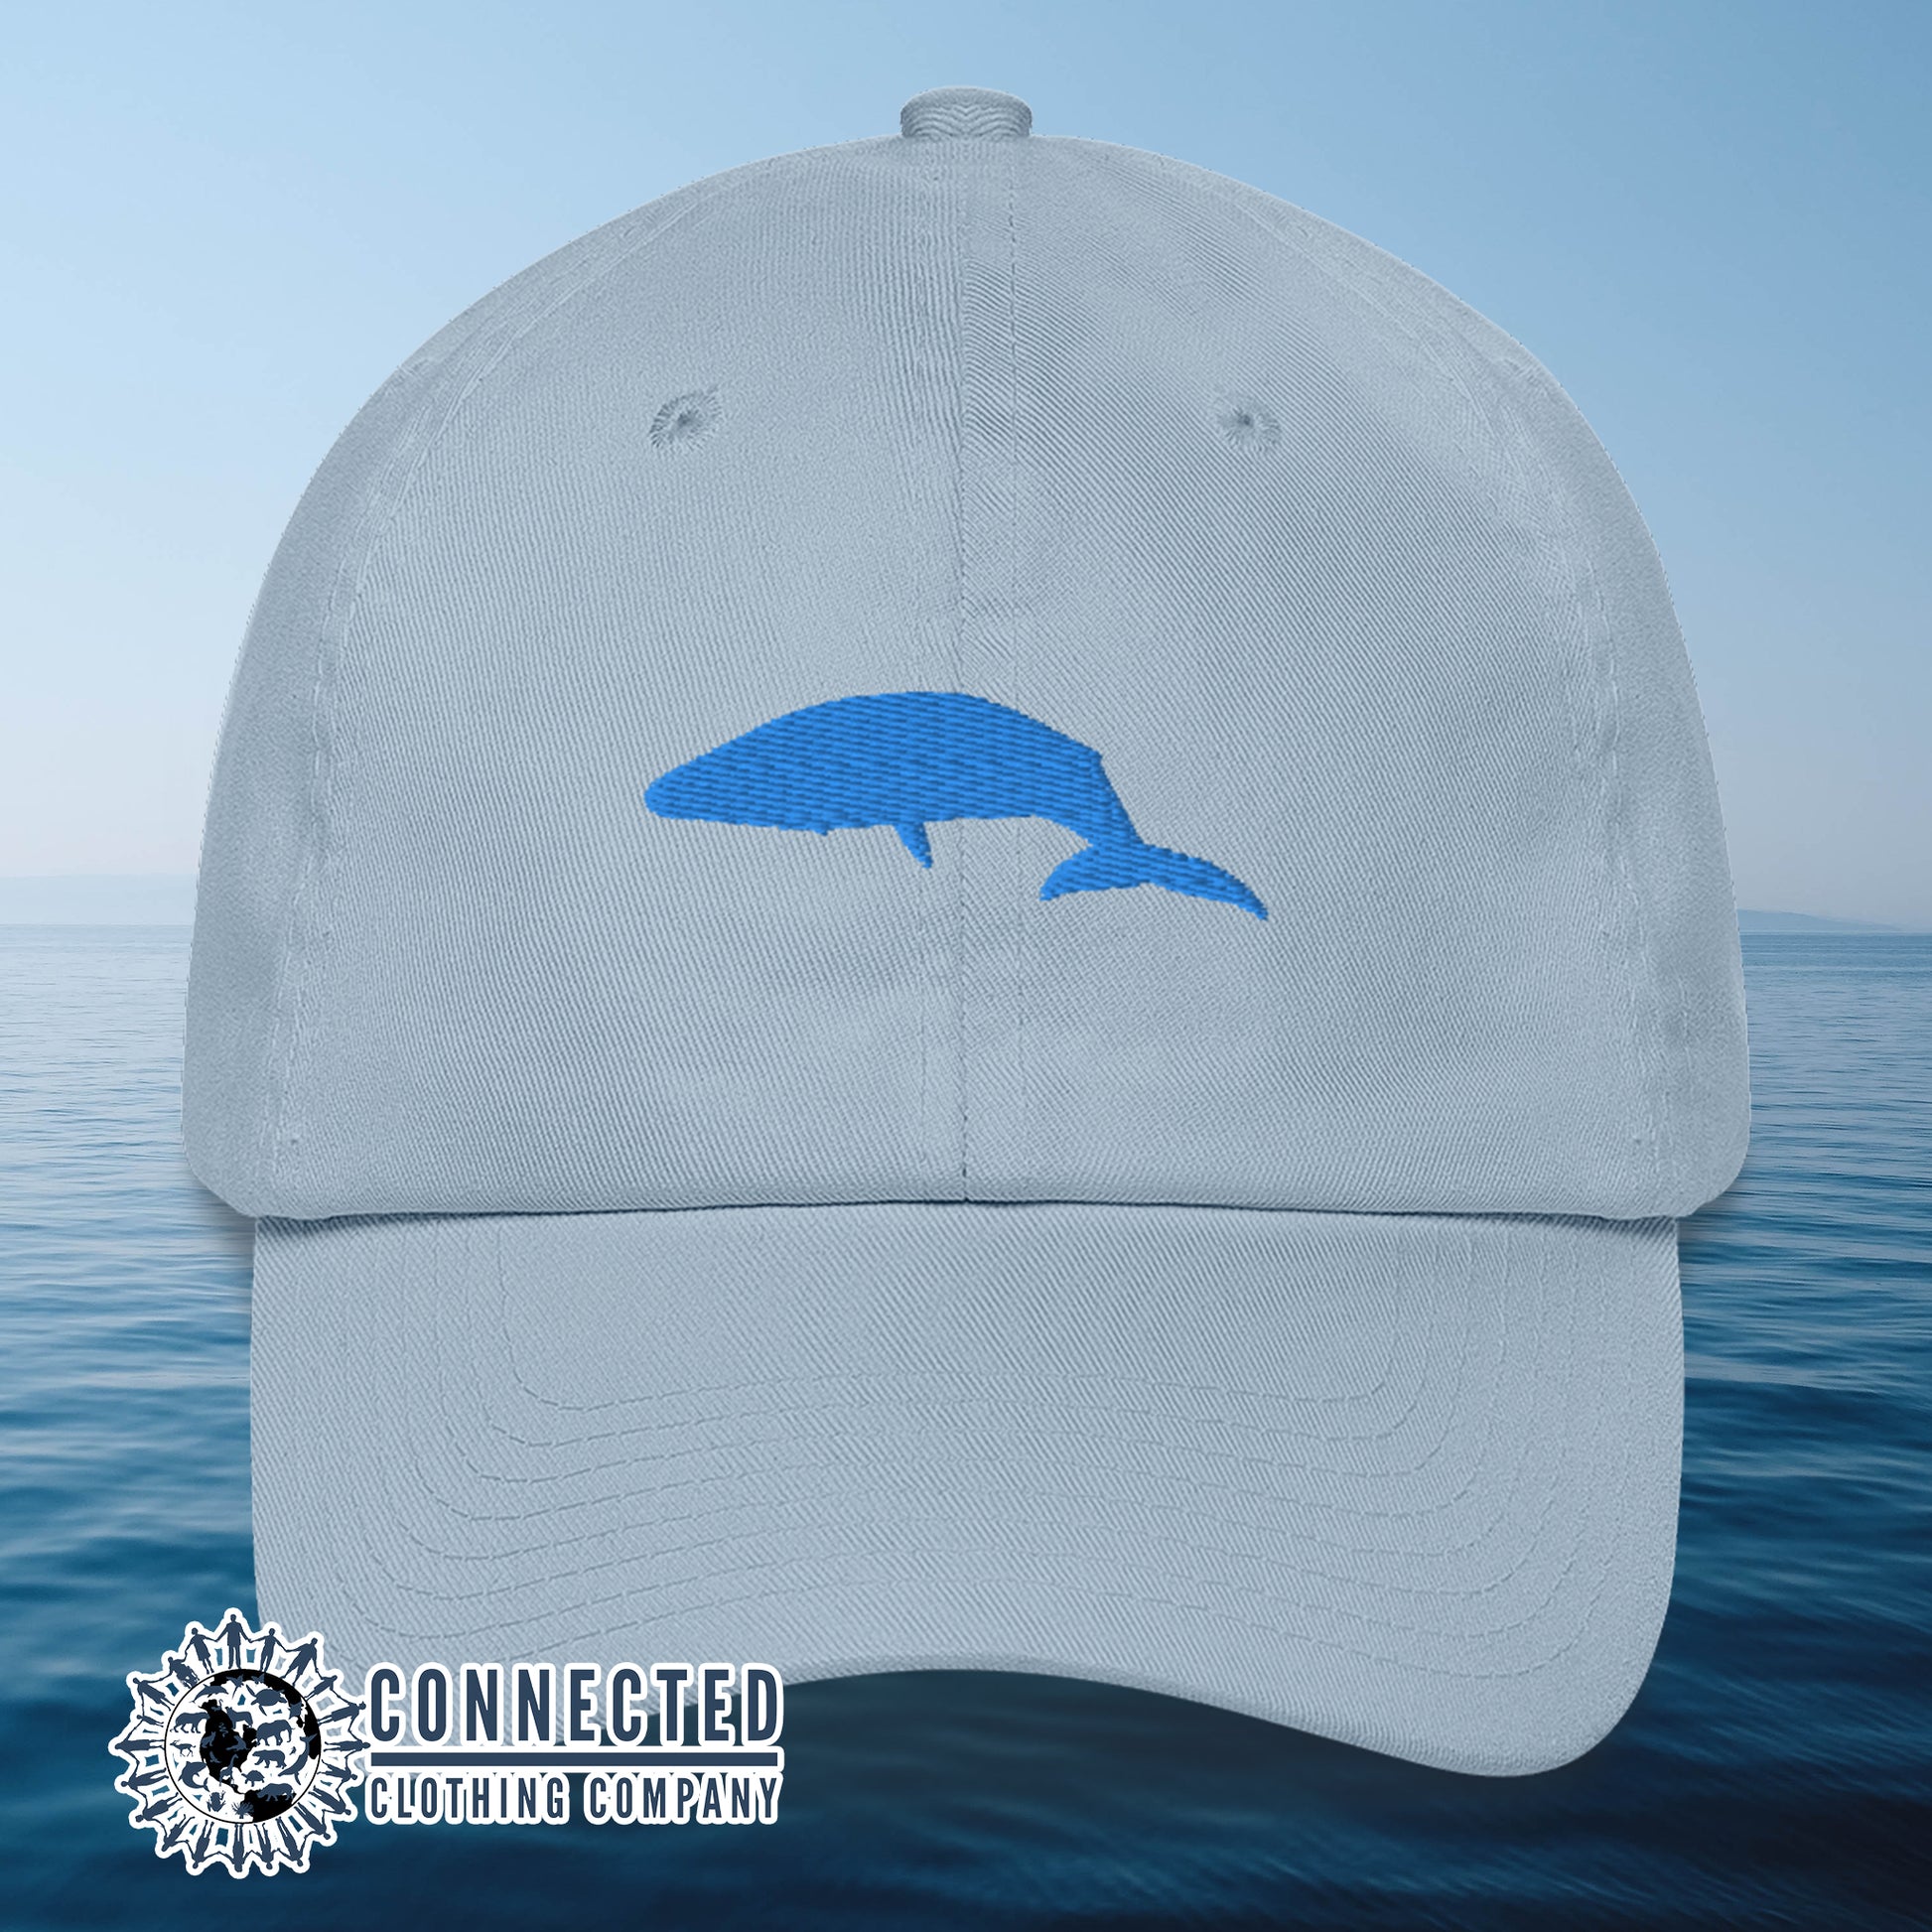 Blue Blue Whale Cotton Cap - Connected Clothing Company - 10% of profits donated to Mission Blue ocean conservation